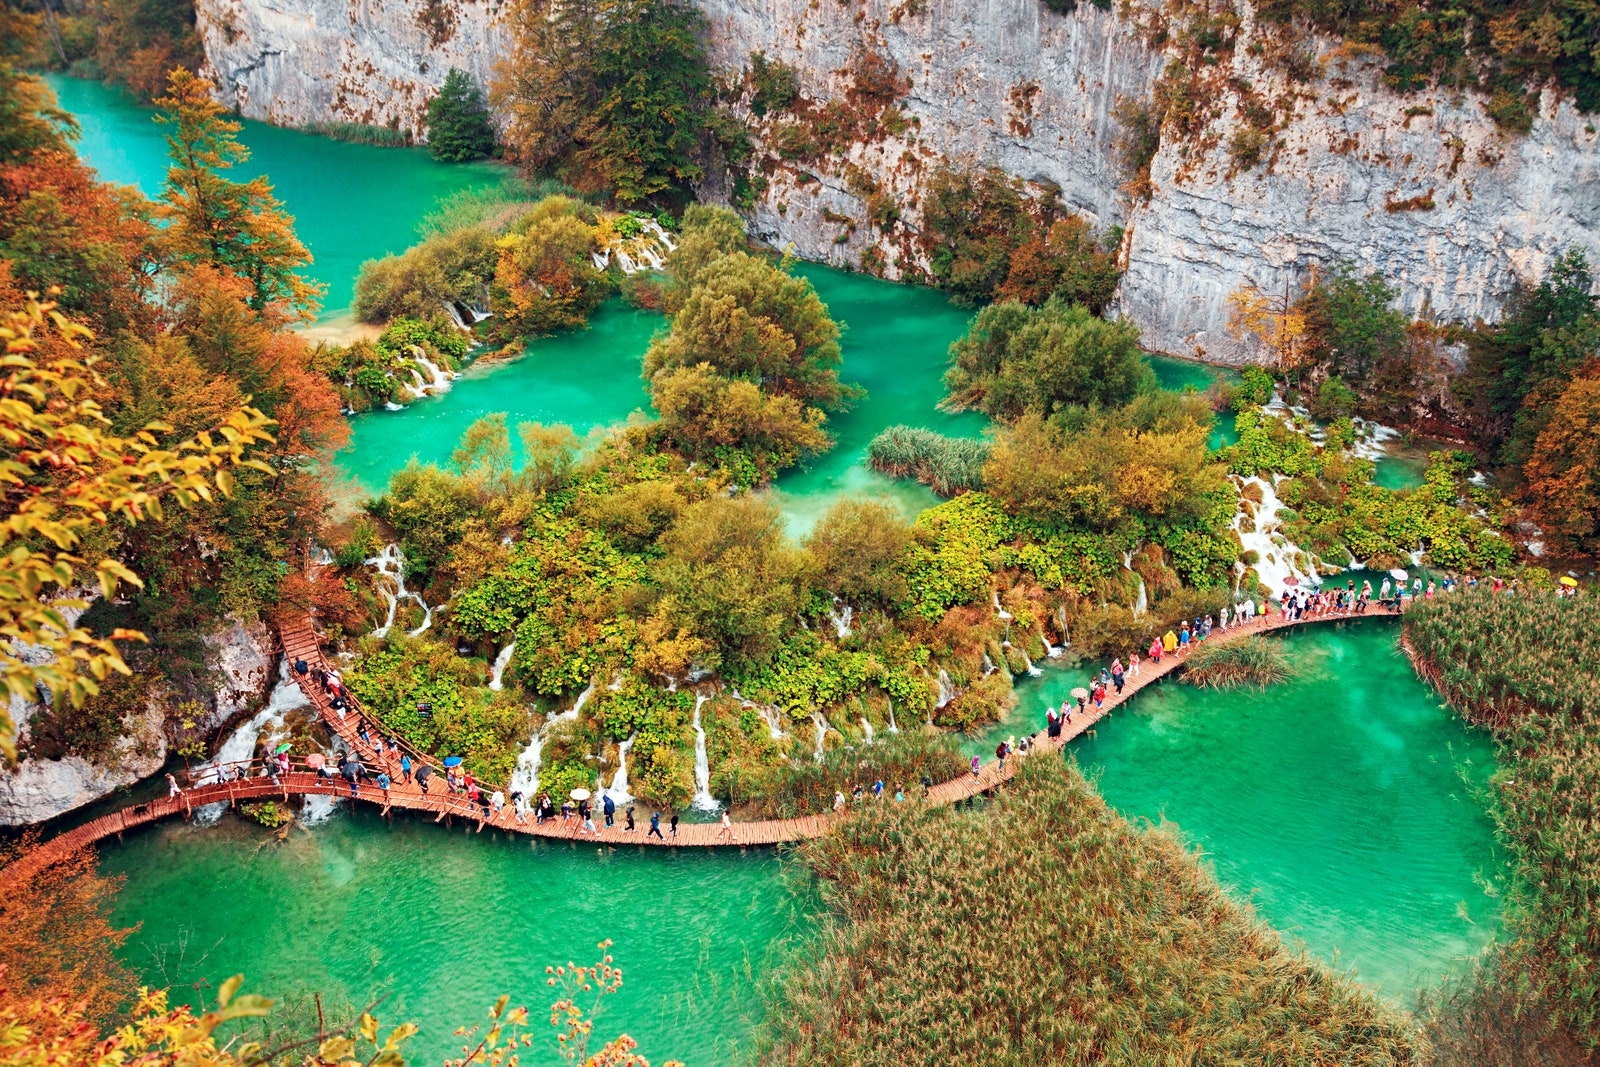 Can You Match These Extraordinary Natural Features to Their Respective Countries? Croatia